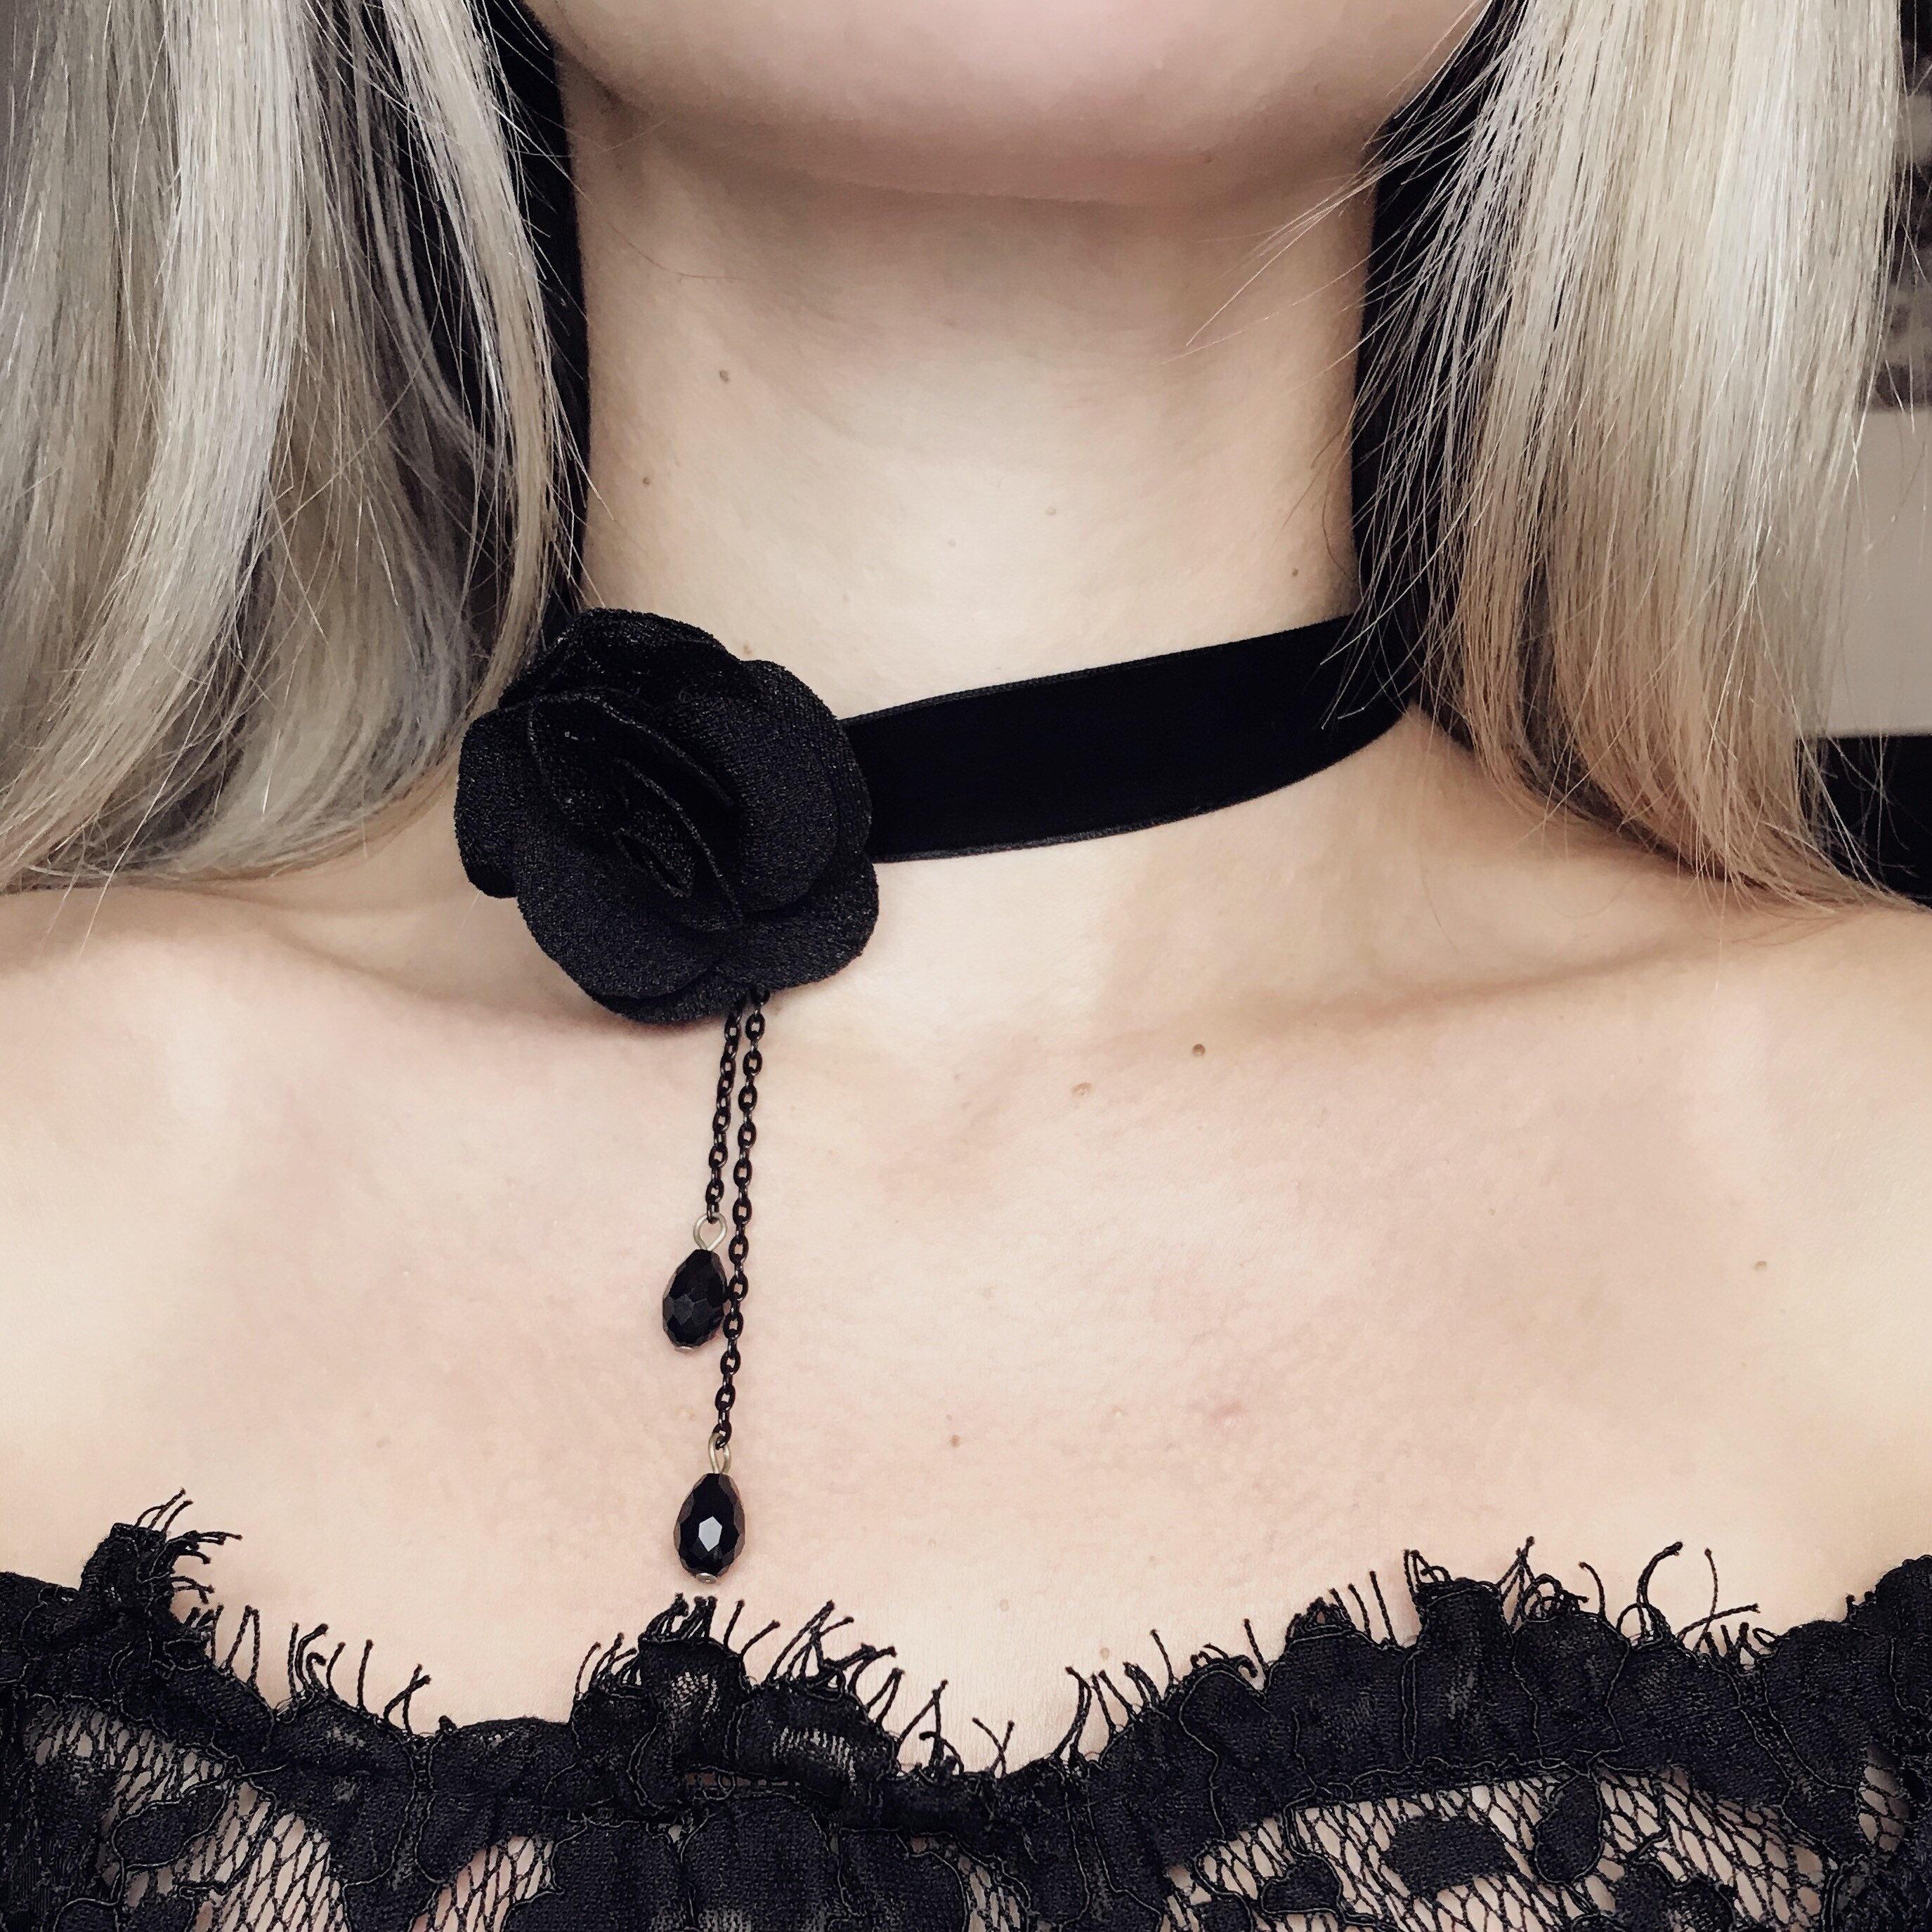 Black Leather Velvet Heart Choker Necklace Layer Lotus Chockers Vintage  Gothic Jewelry Goth Baroque Necklace for Women